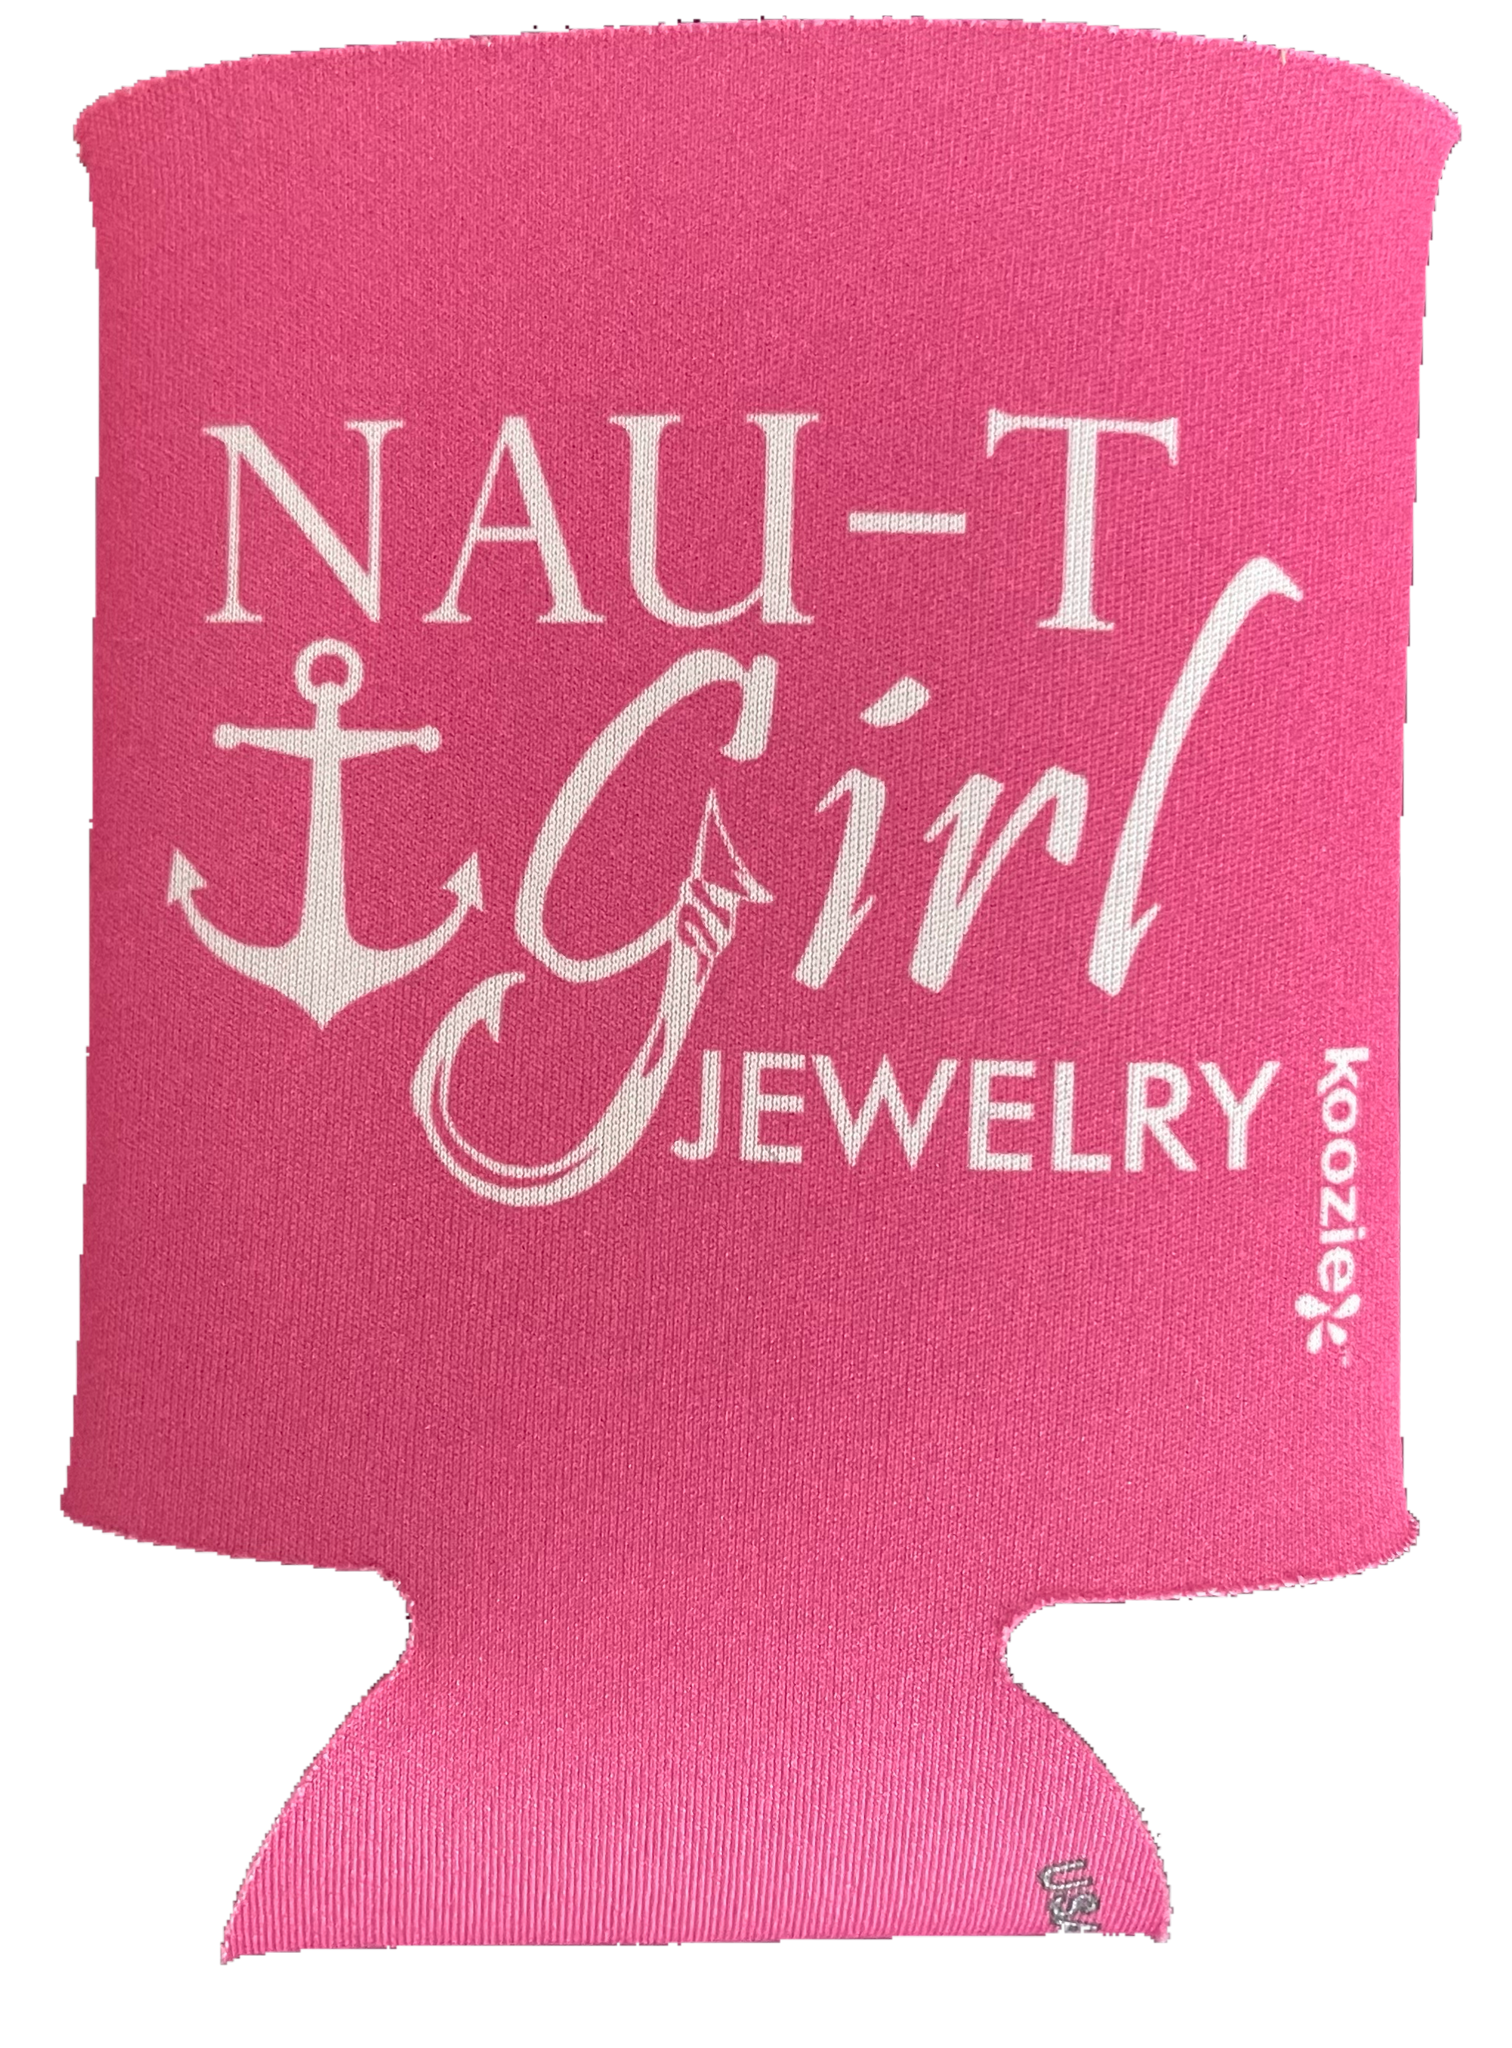 Frost Buddy Can Cooler – Nau-T-Girl Jewelry